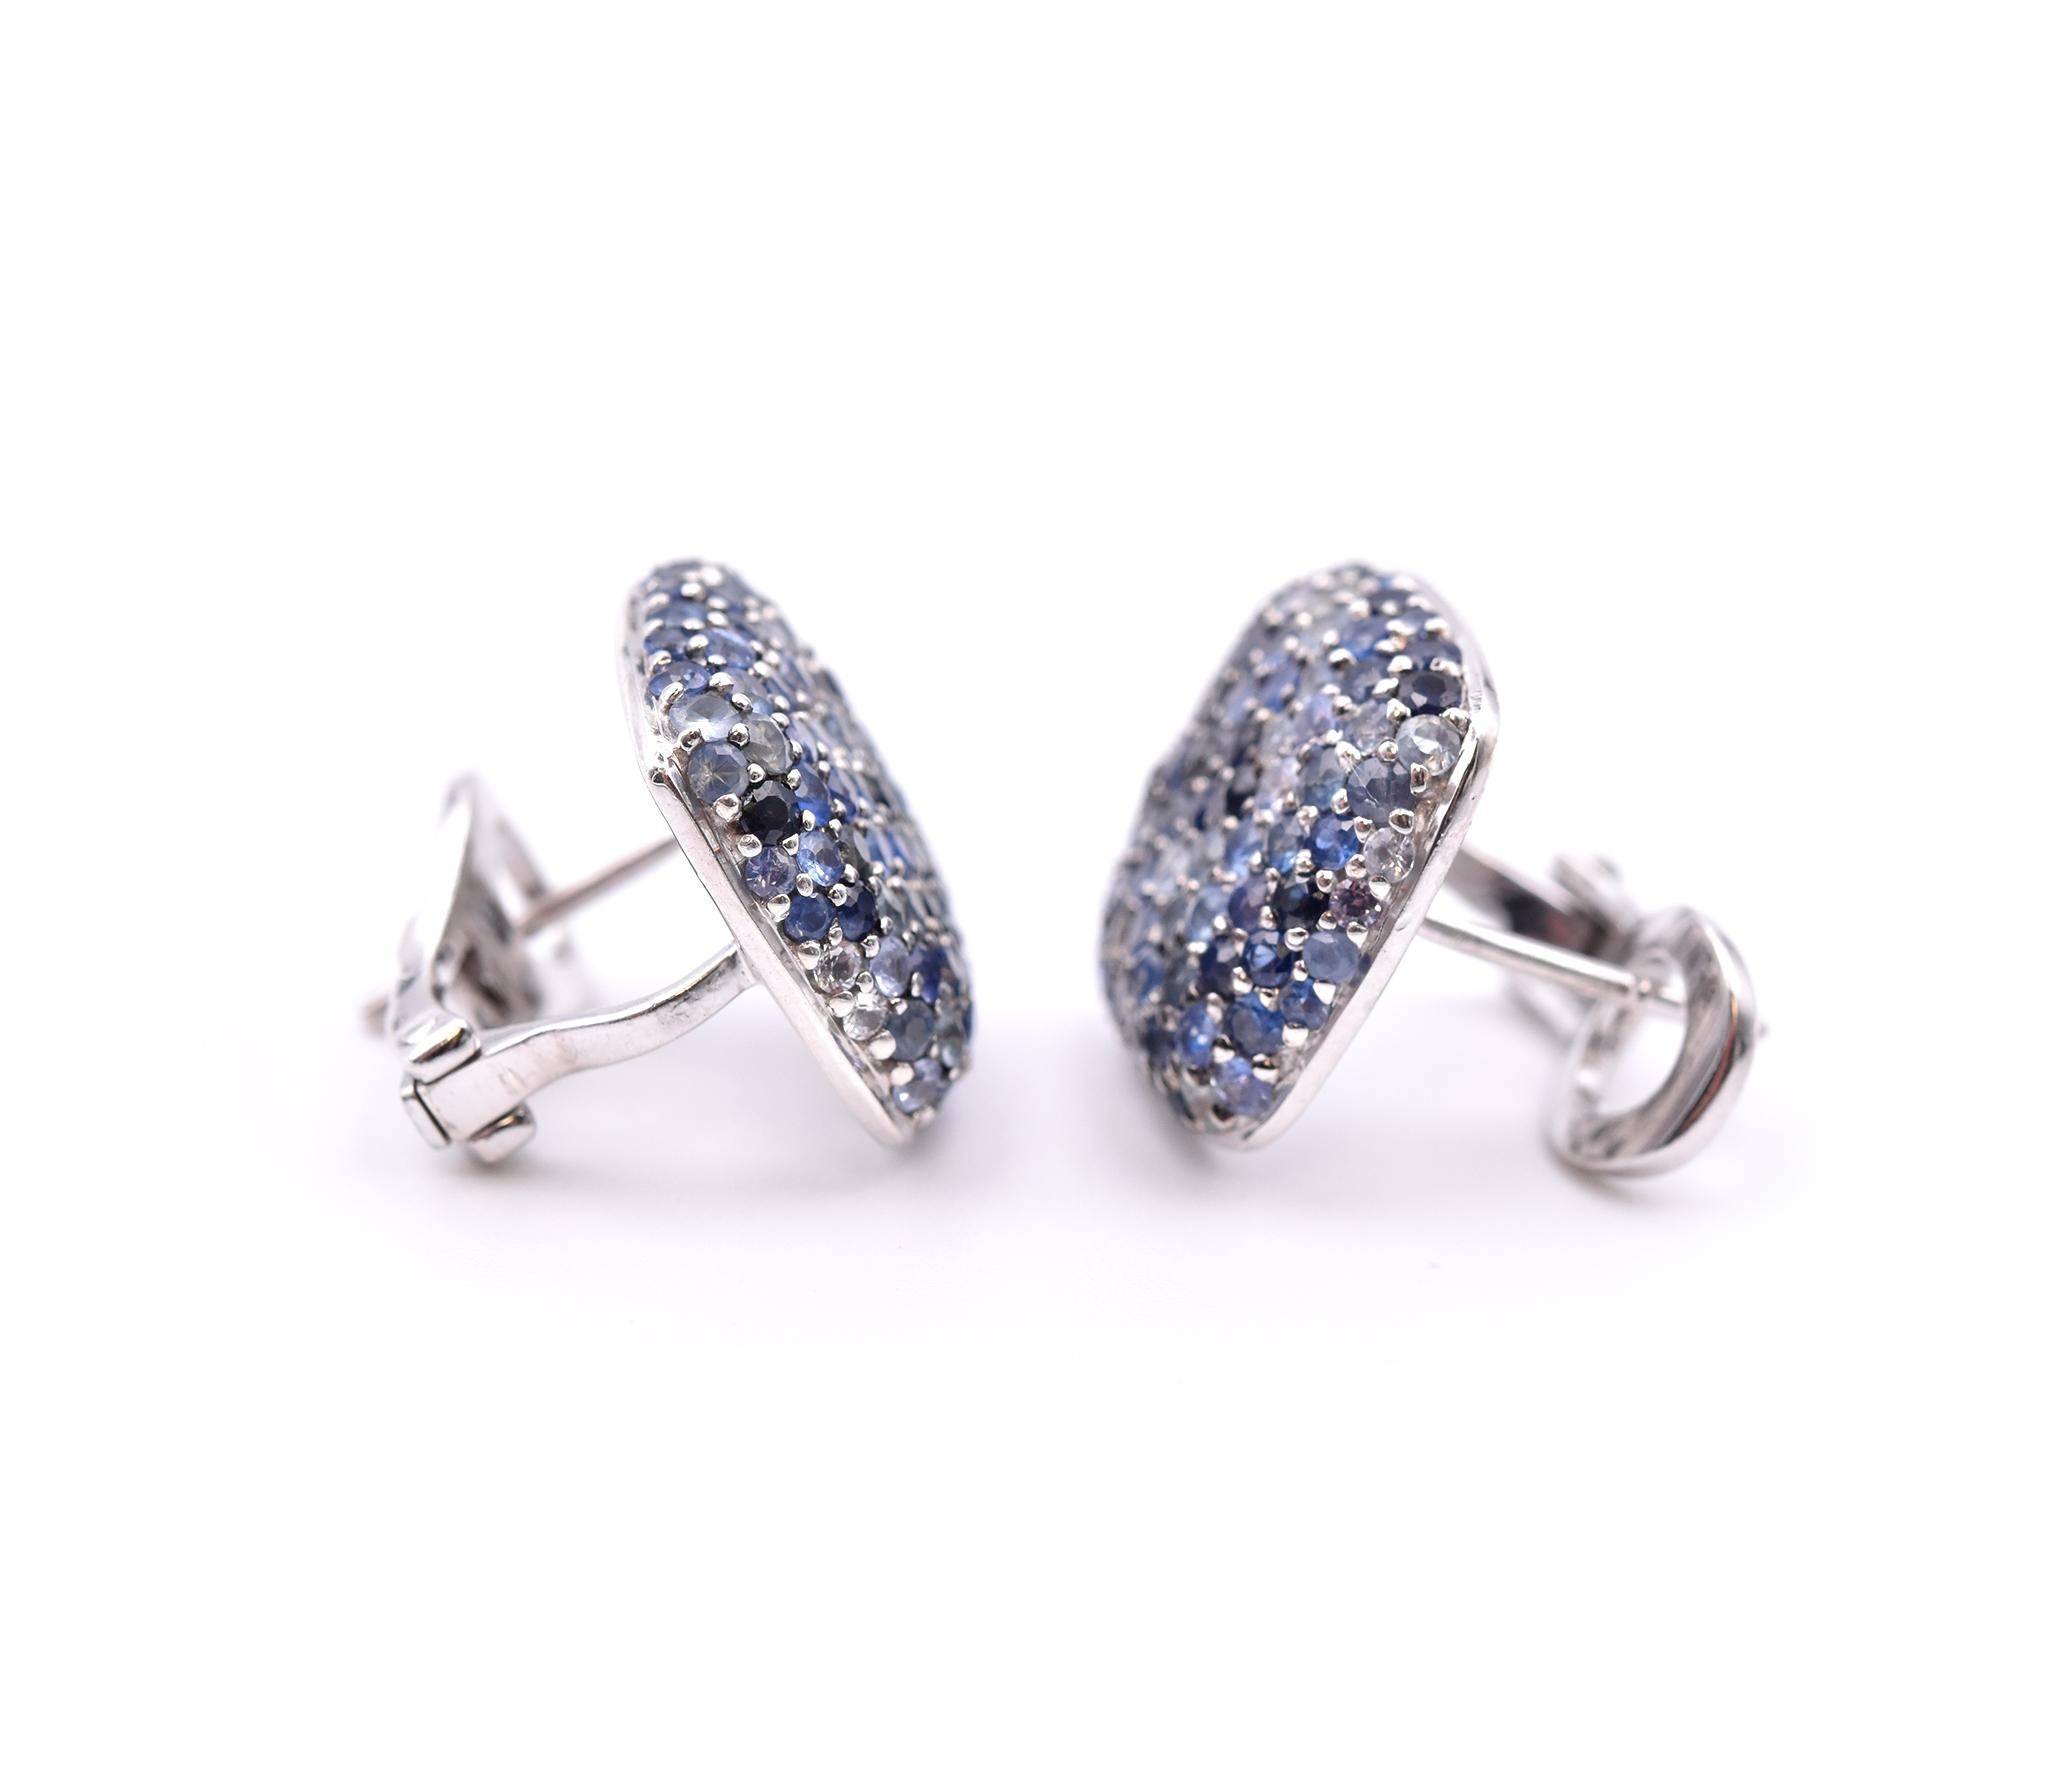 Designer: Effy
Material: Sterling silver
Sapphire: 3.56cttw Mixed Blue
Dimensions: earrings measure 15mm X 15mm
Weight: 6.77 grams